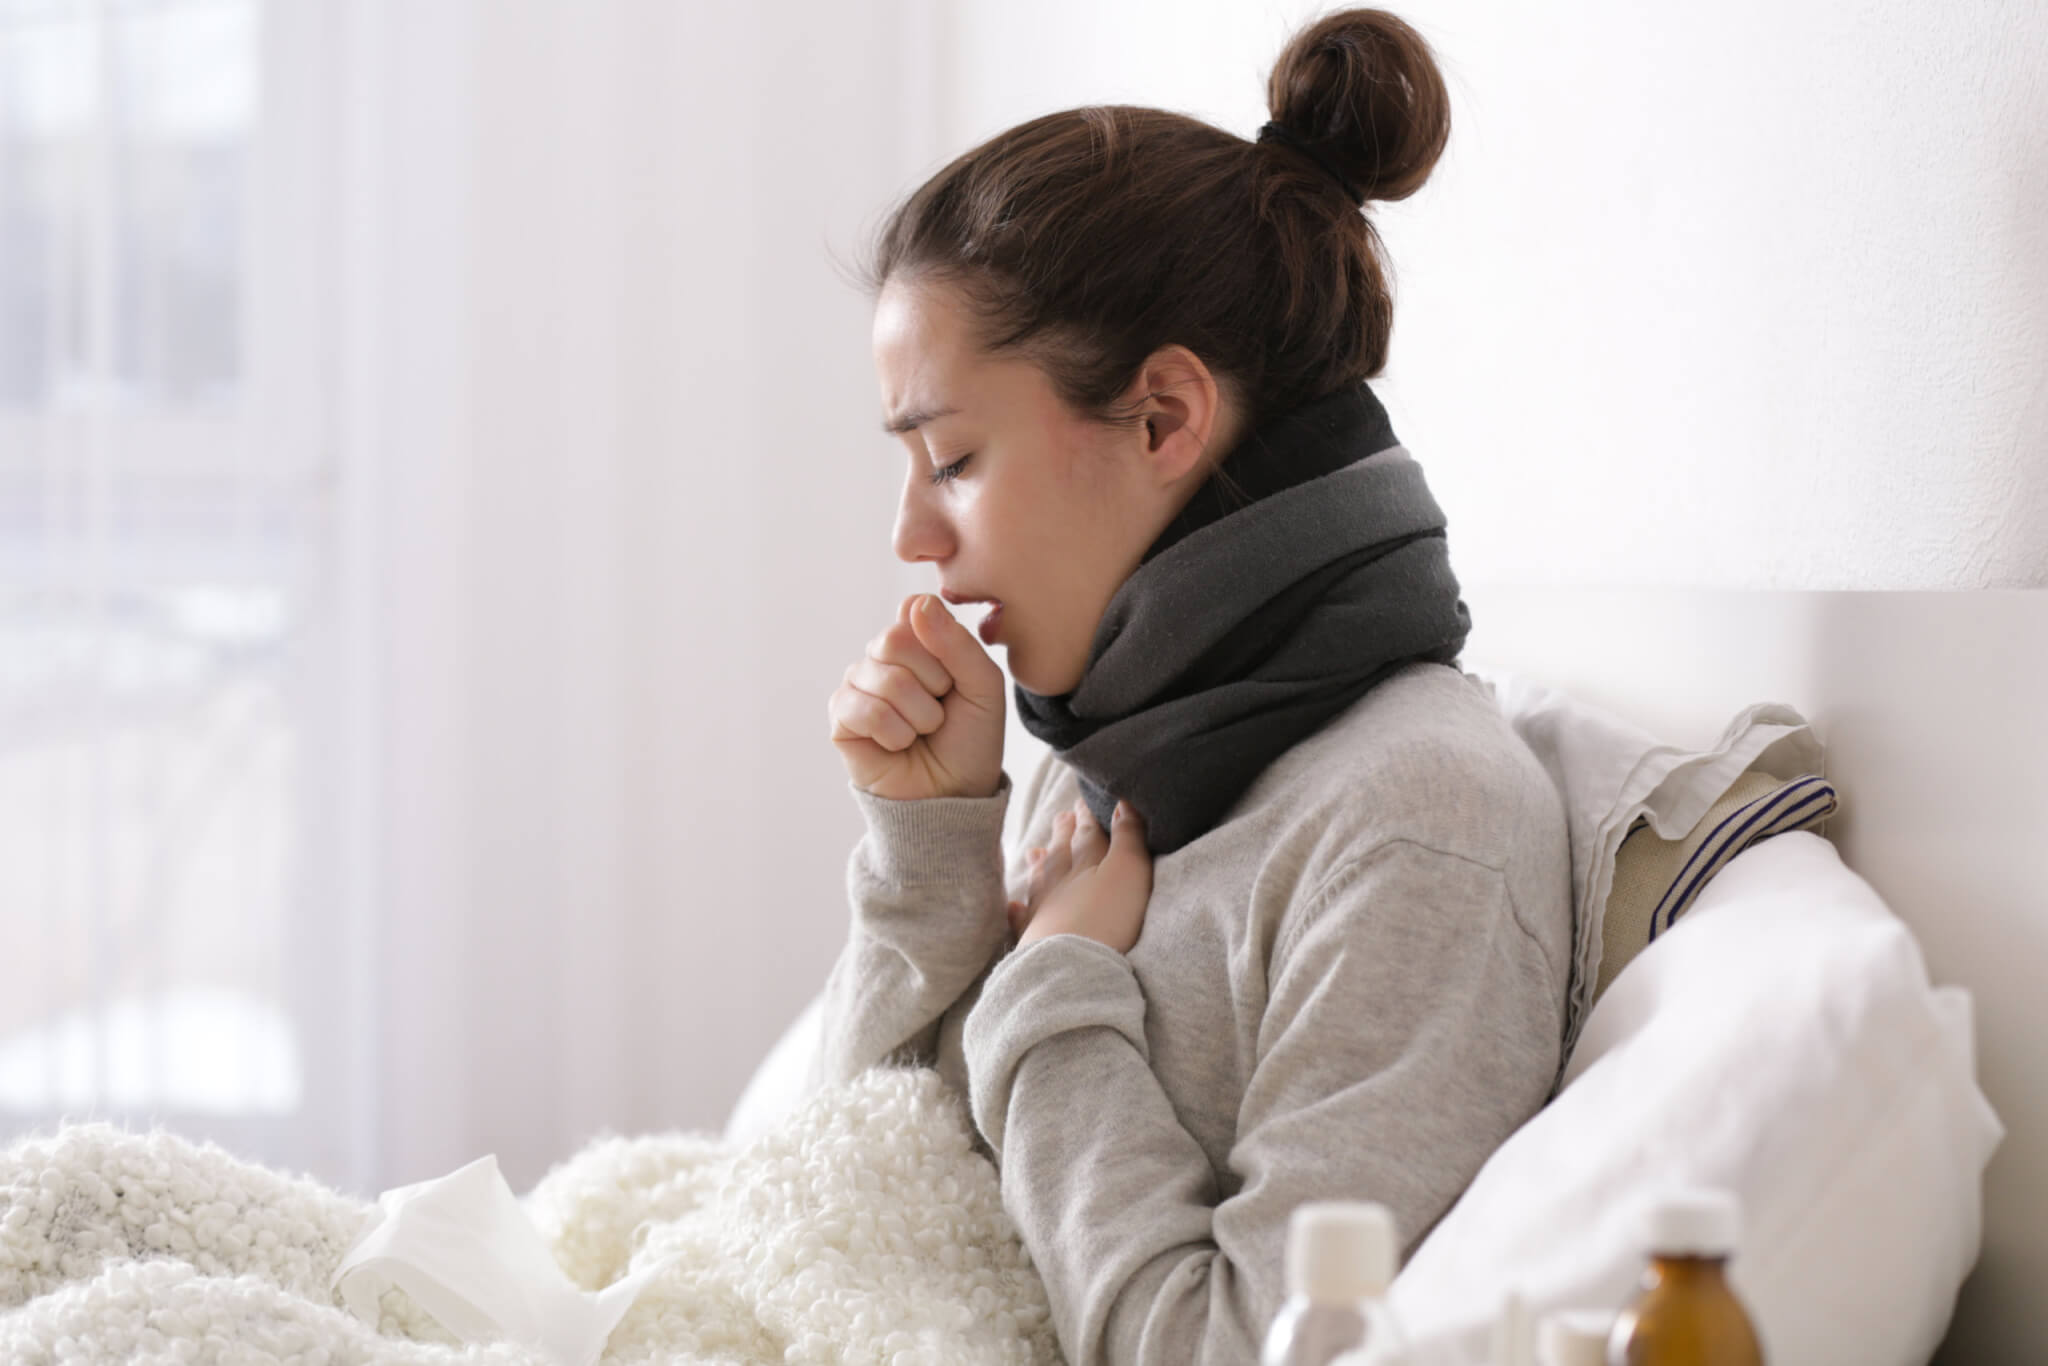 Best Cough Remedies: Top 5 Treatments For Sore Throat Relief Most Recommended By Experts